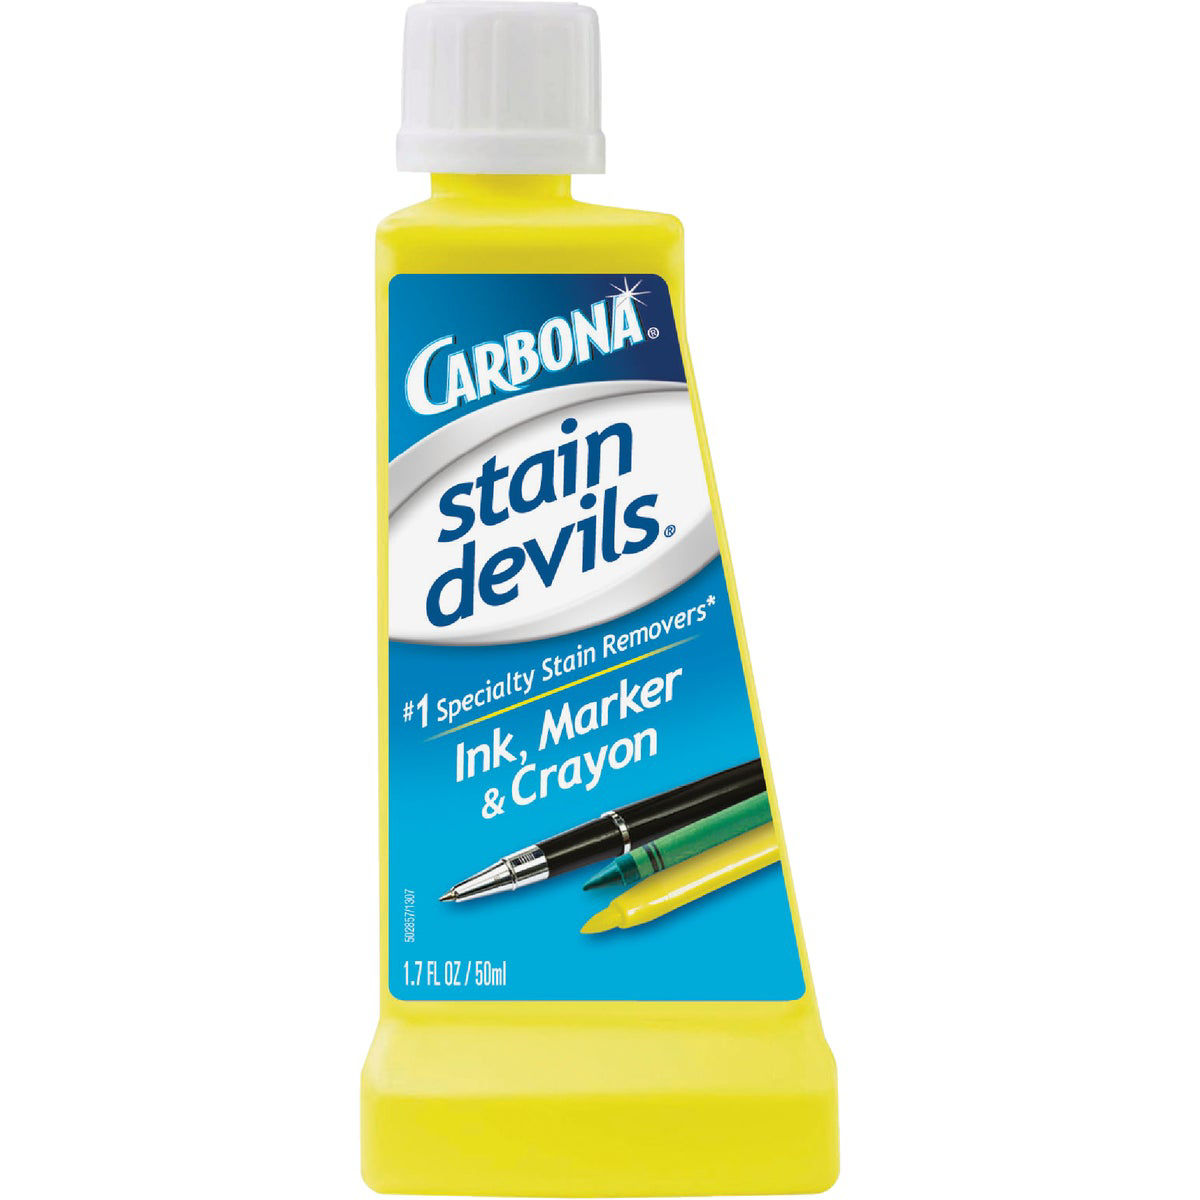 Stain Devils  Carbona Cleaning Products